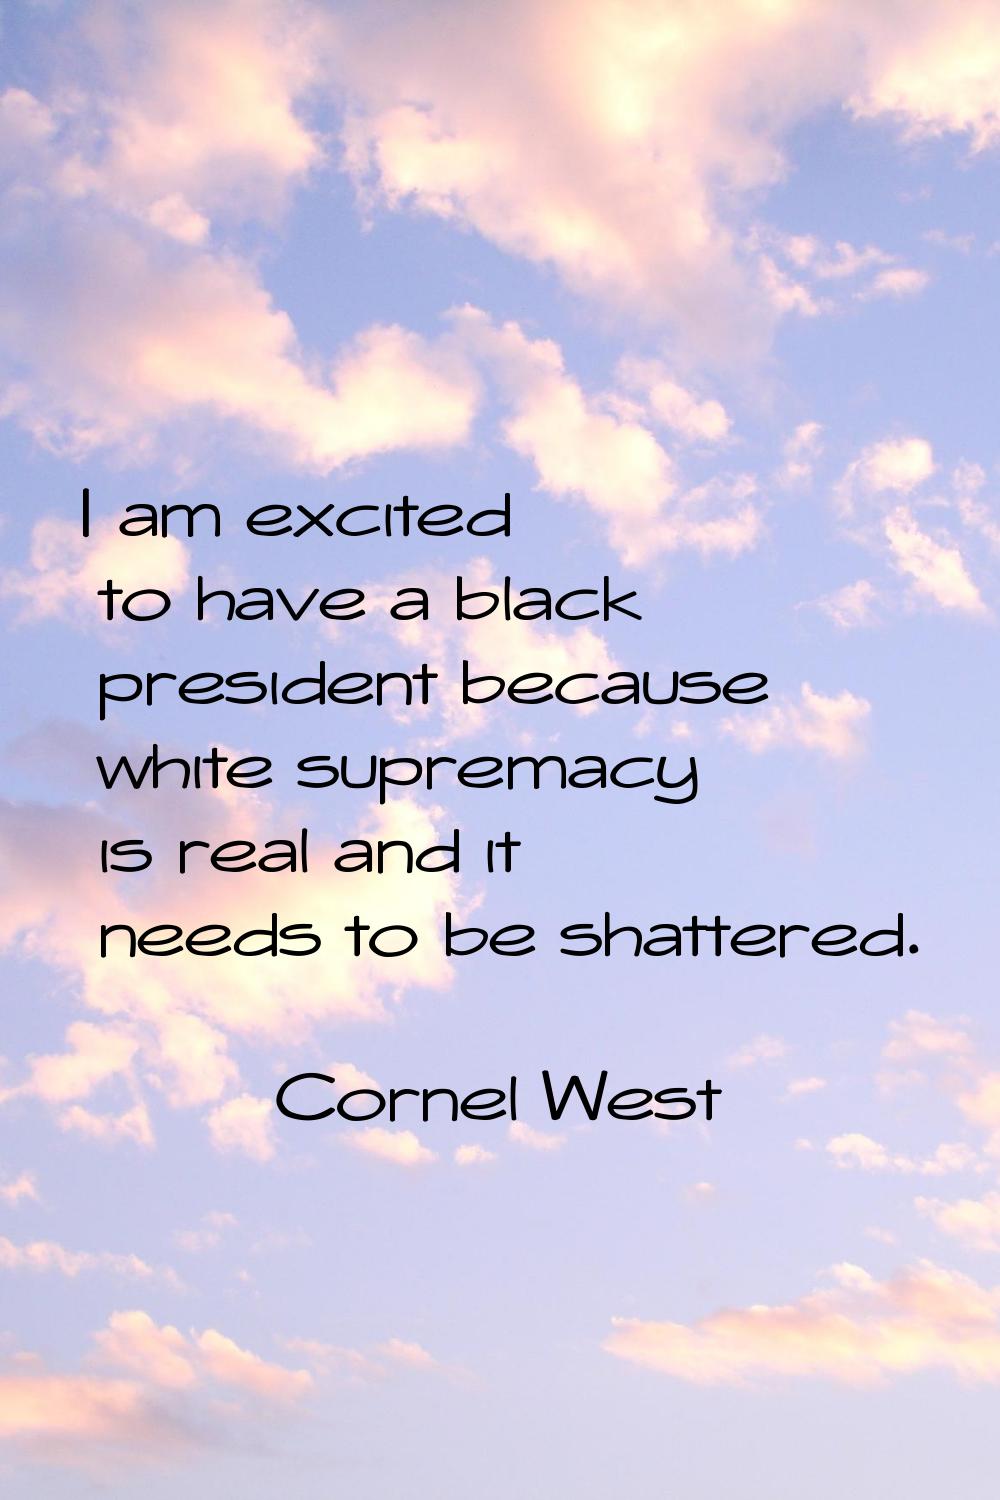 I am excited to have a black president because white supremacy is real and it needs to be shattered